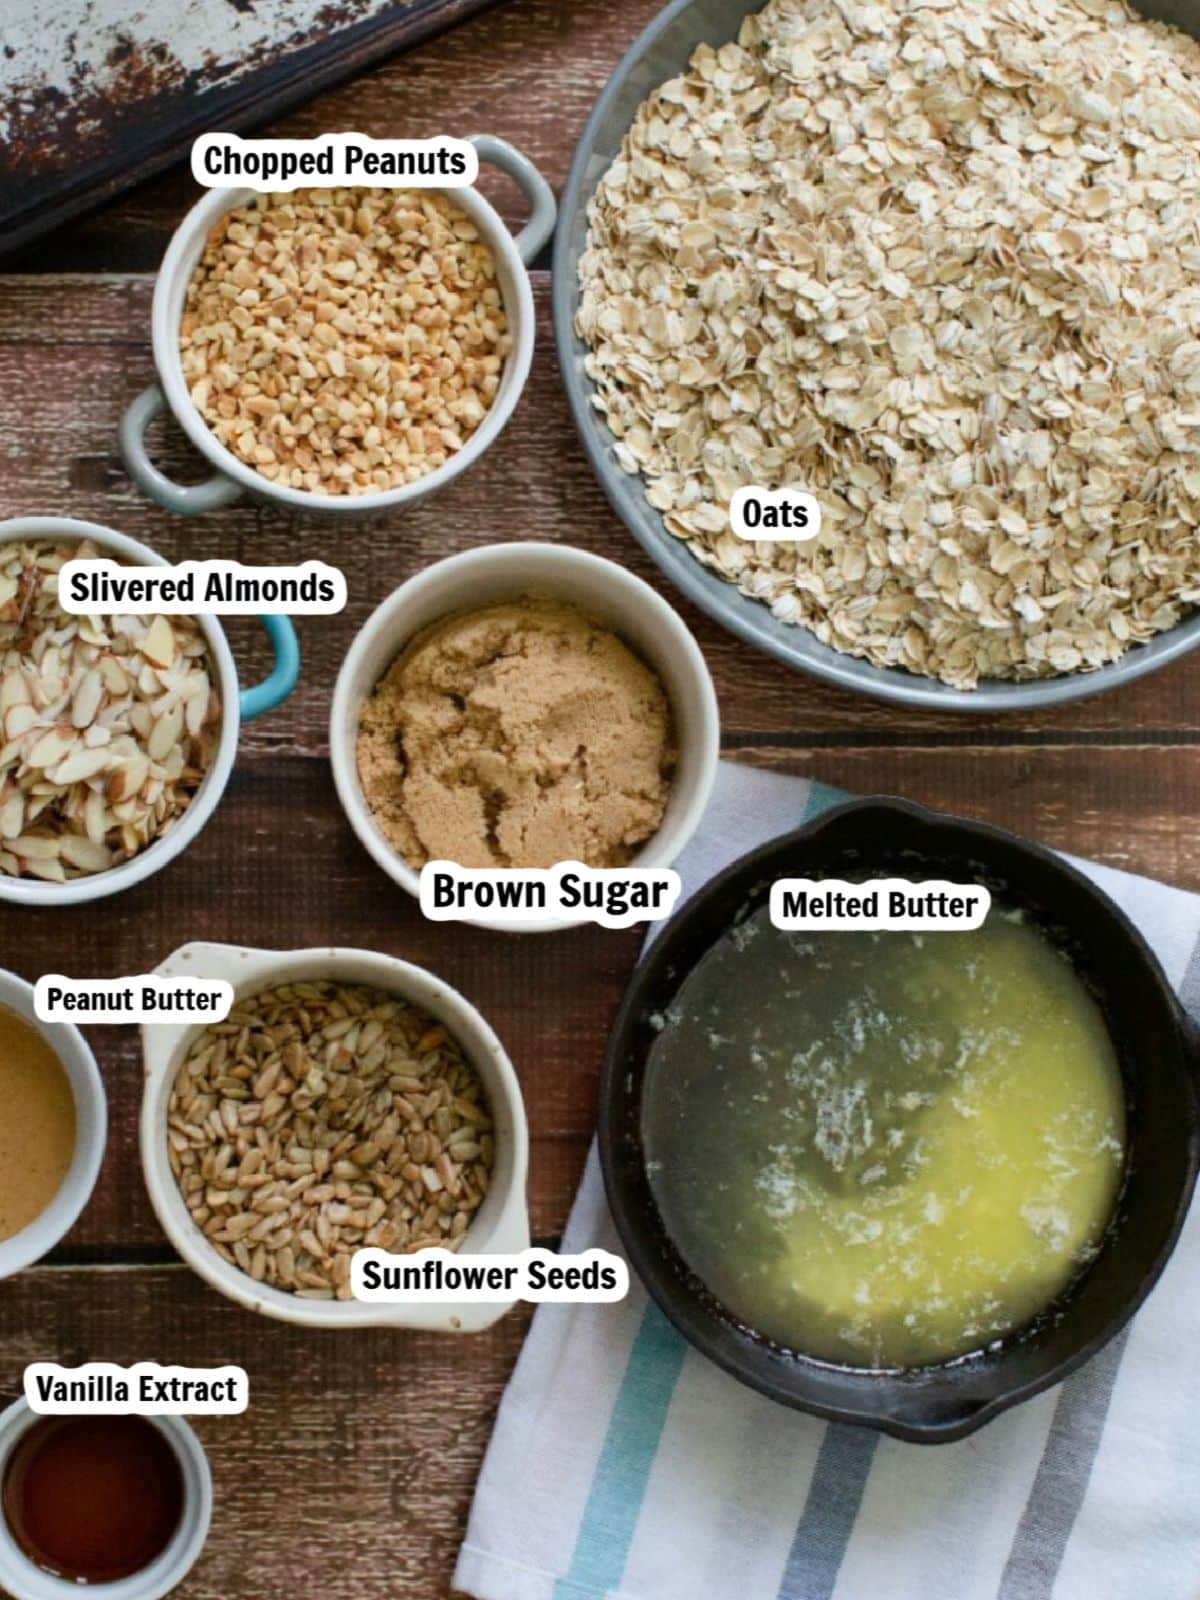 ingredients for homemade granola.